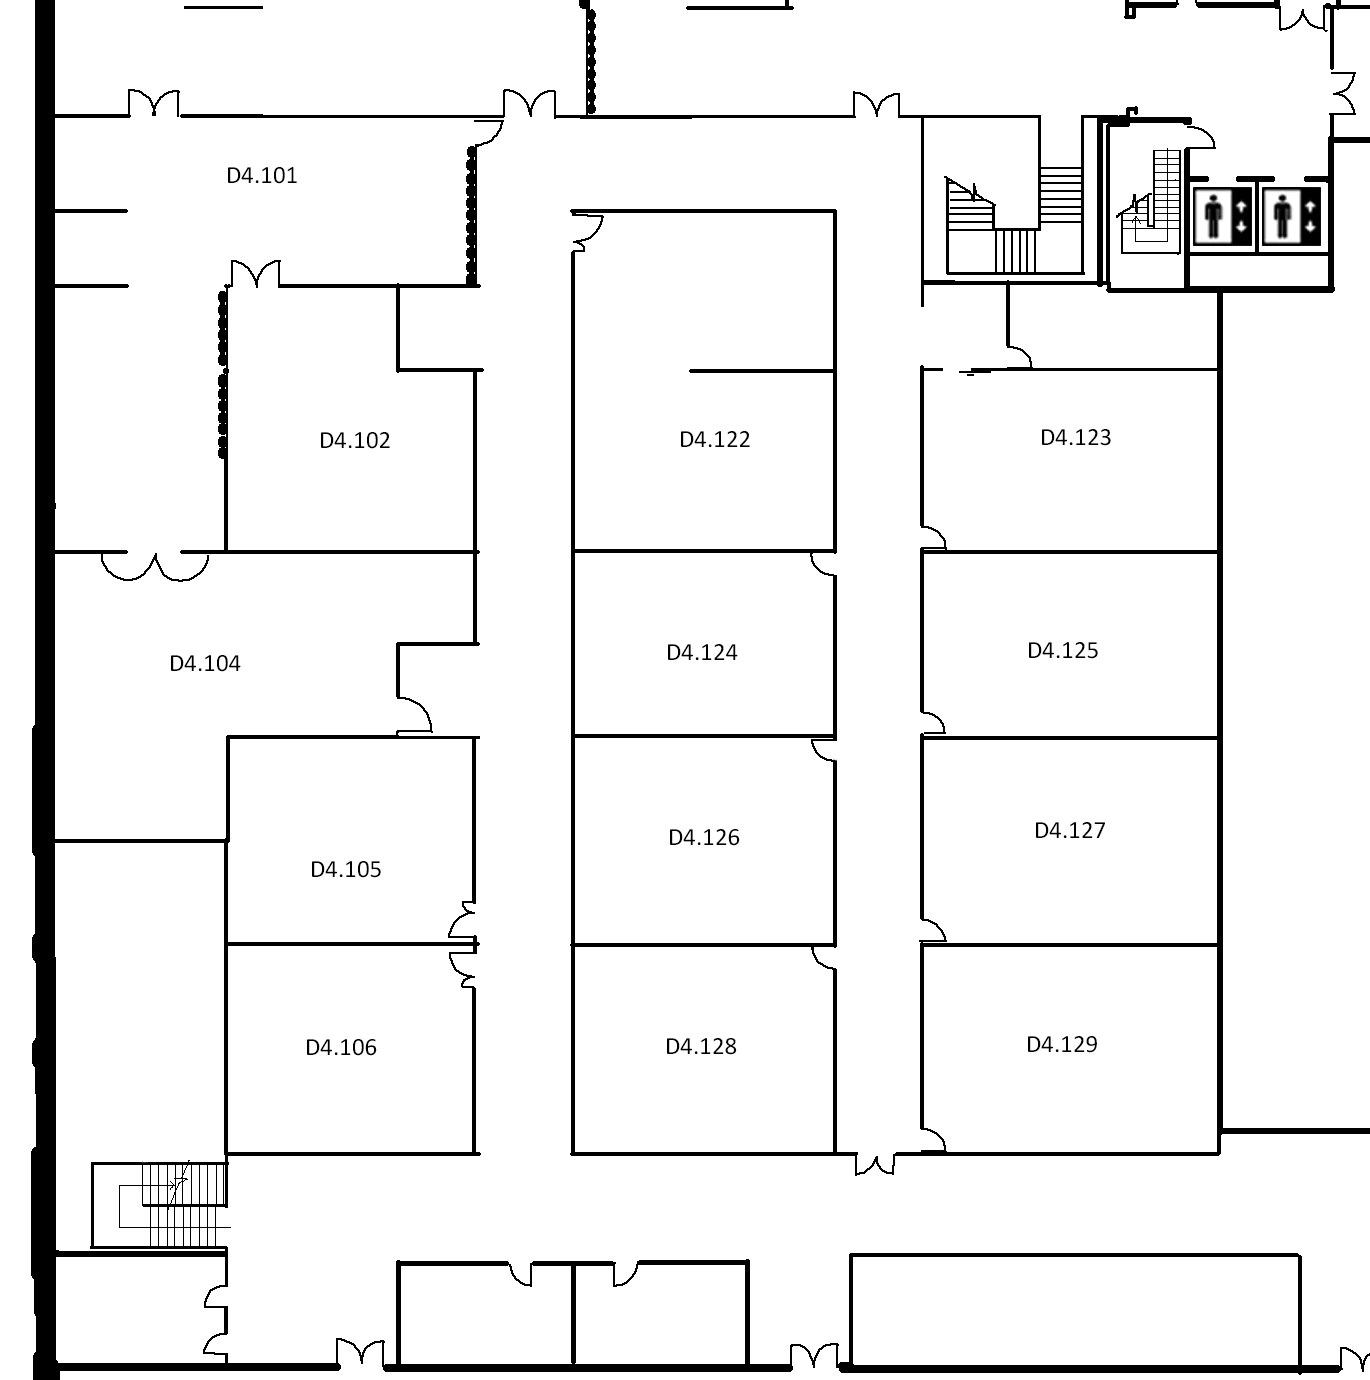 Map indicating the location of the rooms listed for Building D, level 4